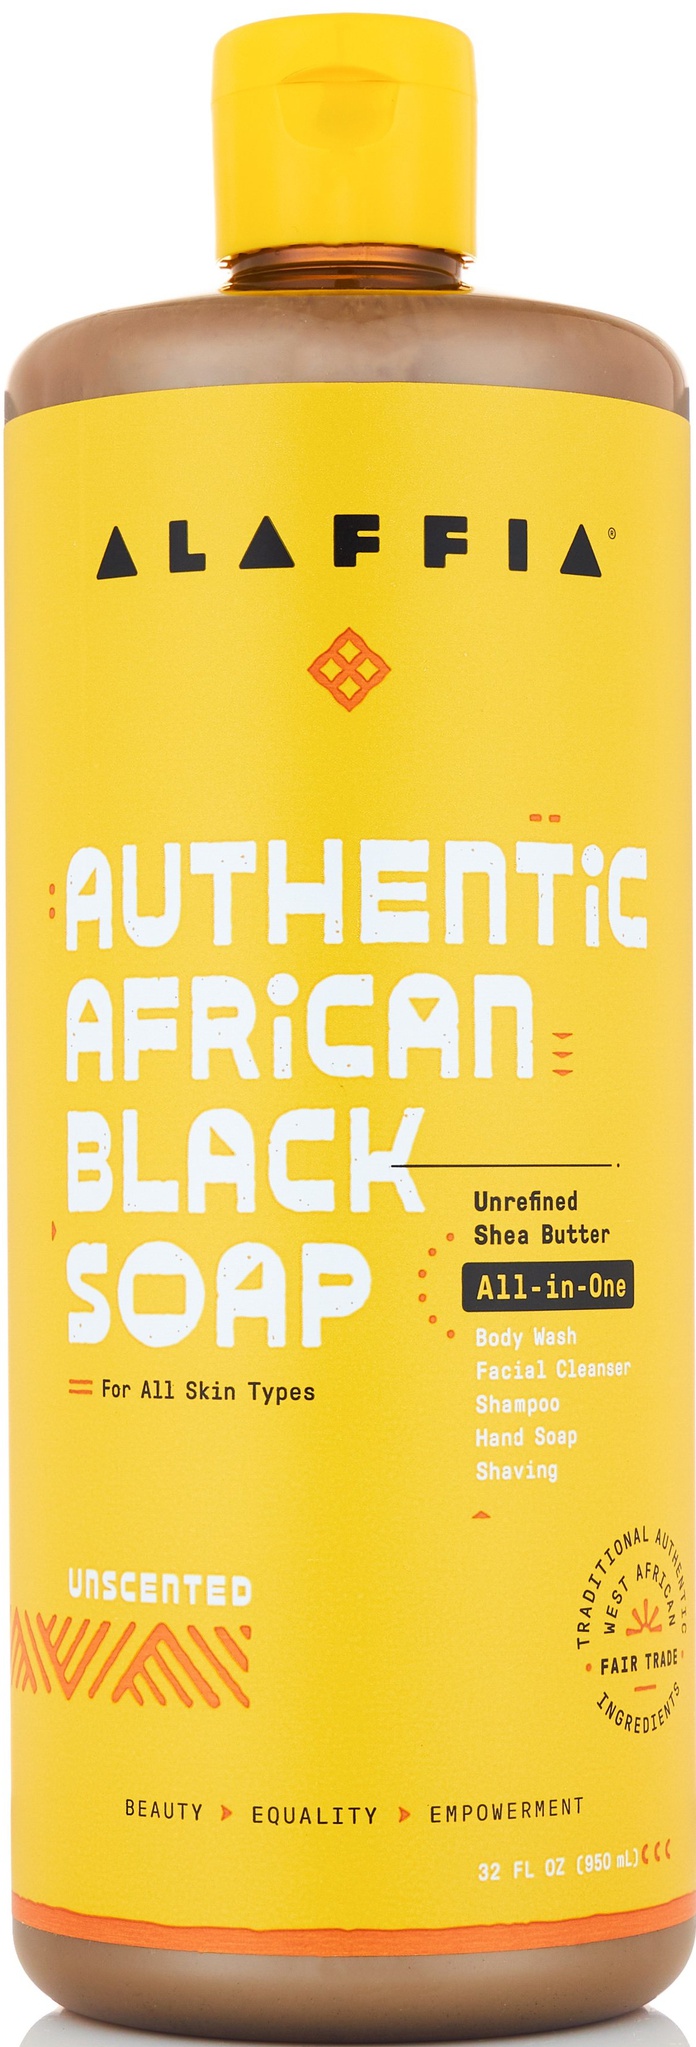 Alaffia Authentic African Black Soap All-in-one - Unscented